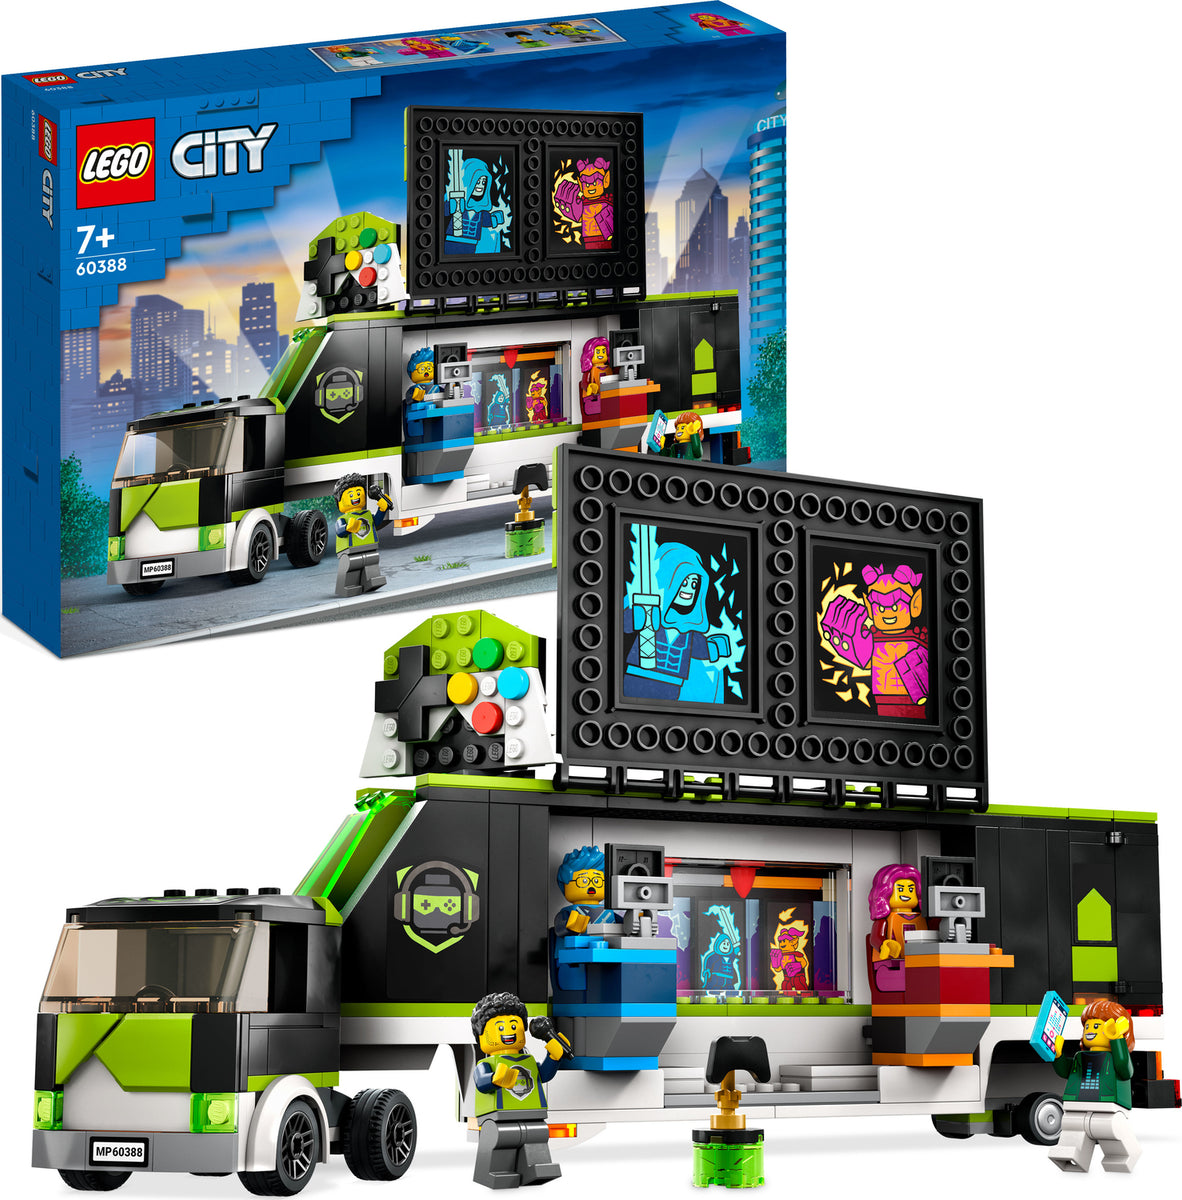 LEGO City 60388 Gaming Tournament – Truck Toys Turner